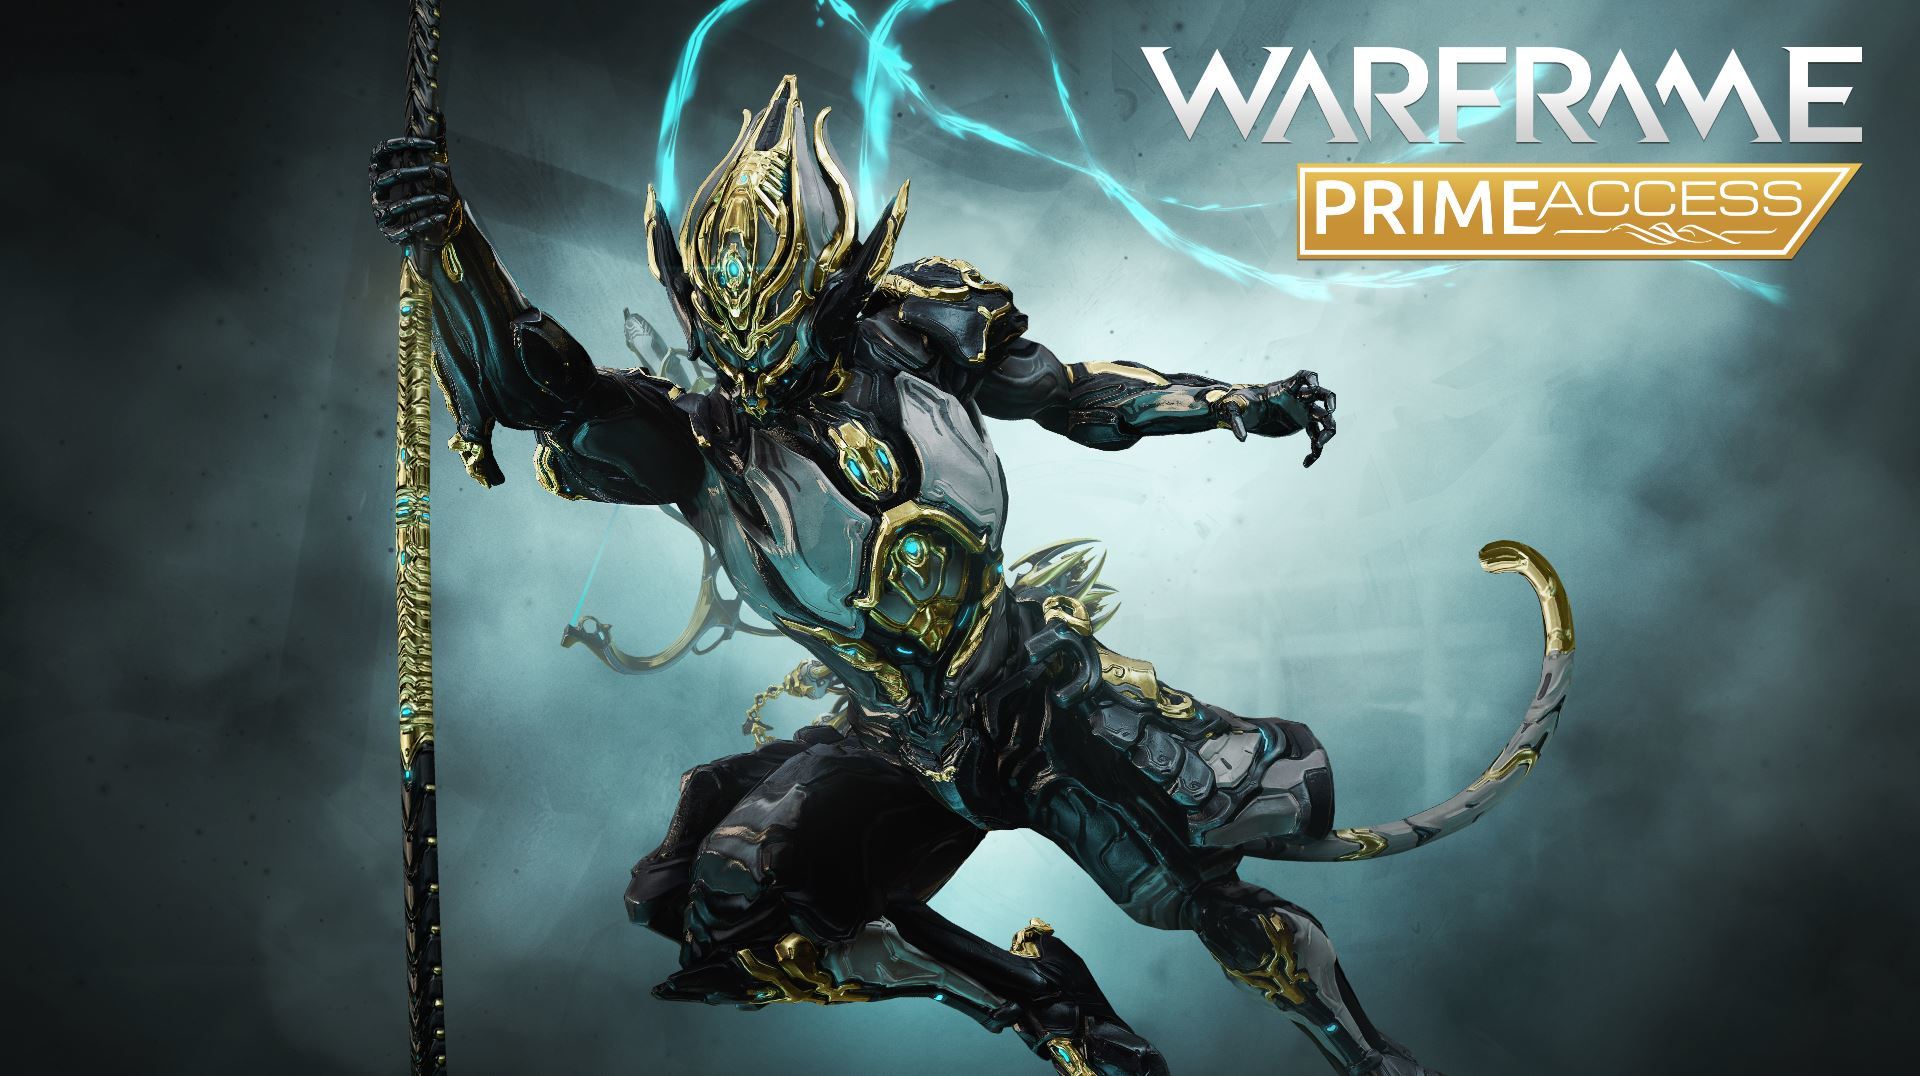 The two new codes seem to be DUVIRI-(anywarframe). Weird but not bad a